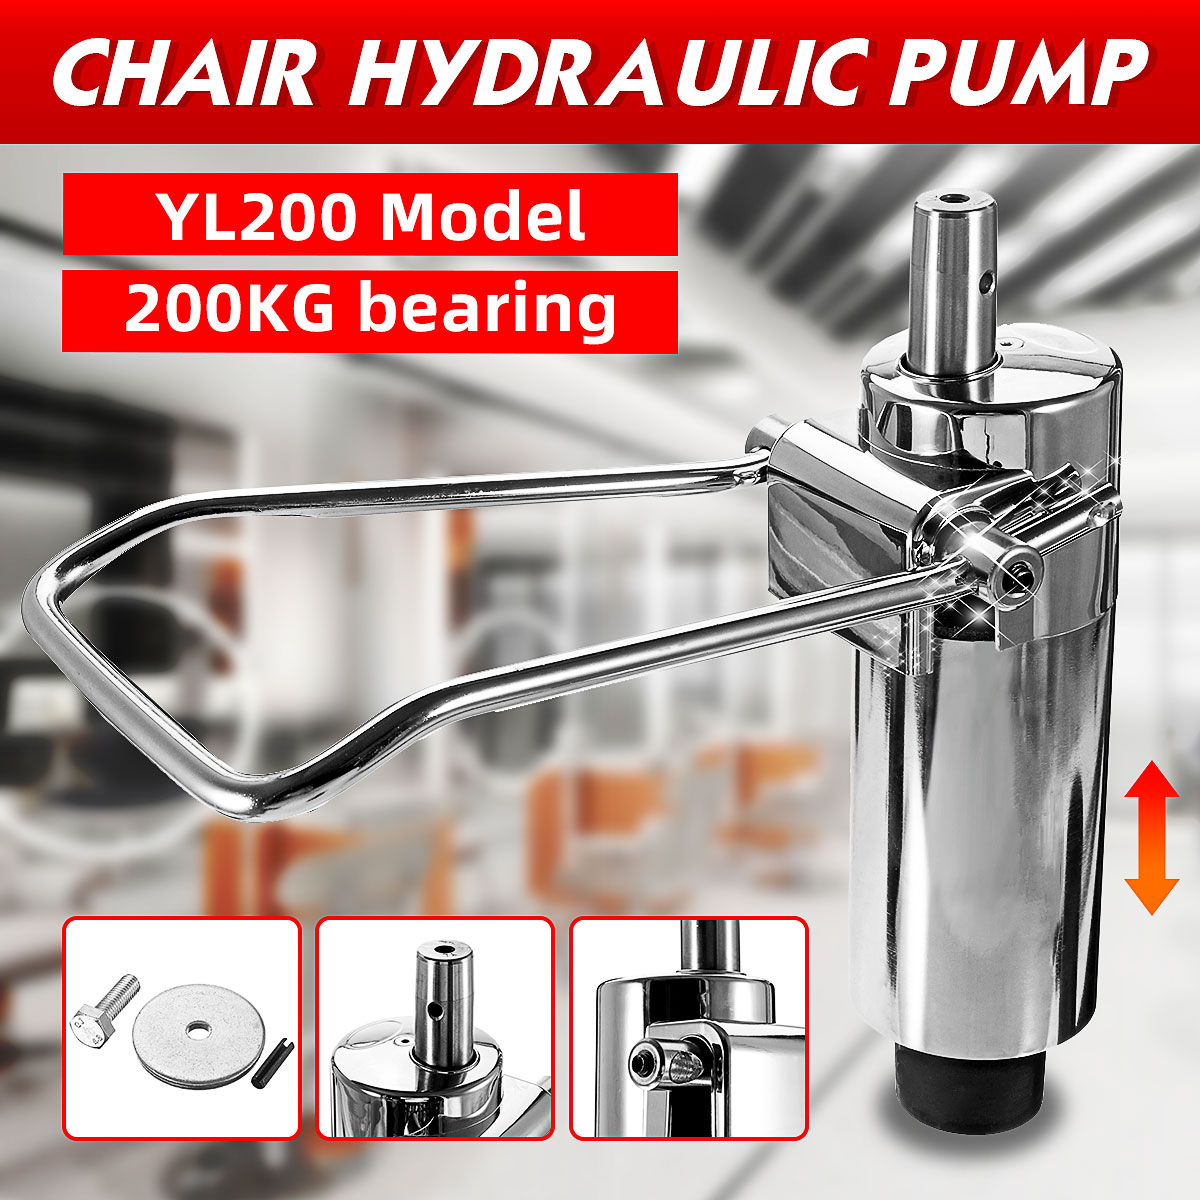 Hydraulic-Pump-Replacement-For-Barber-Hairdressing-Chair-Salon-Lift-Equipment-1774416-1